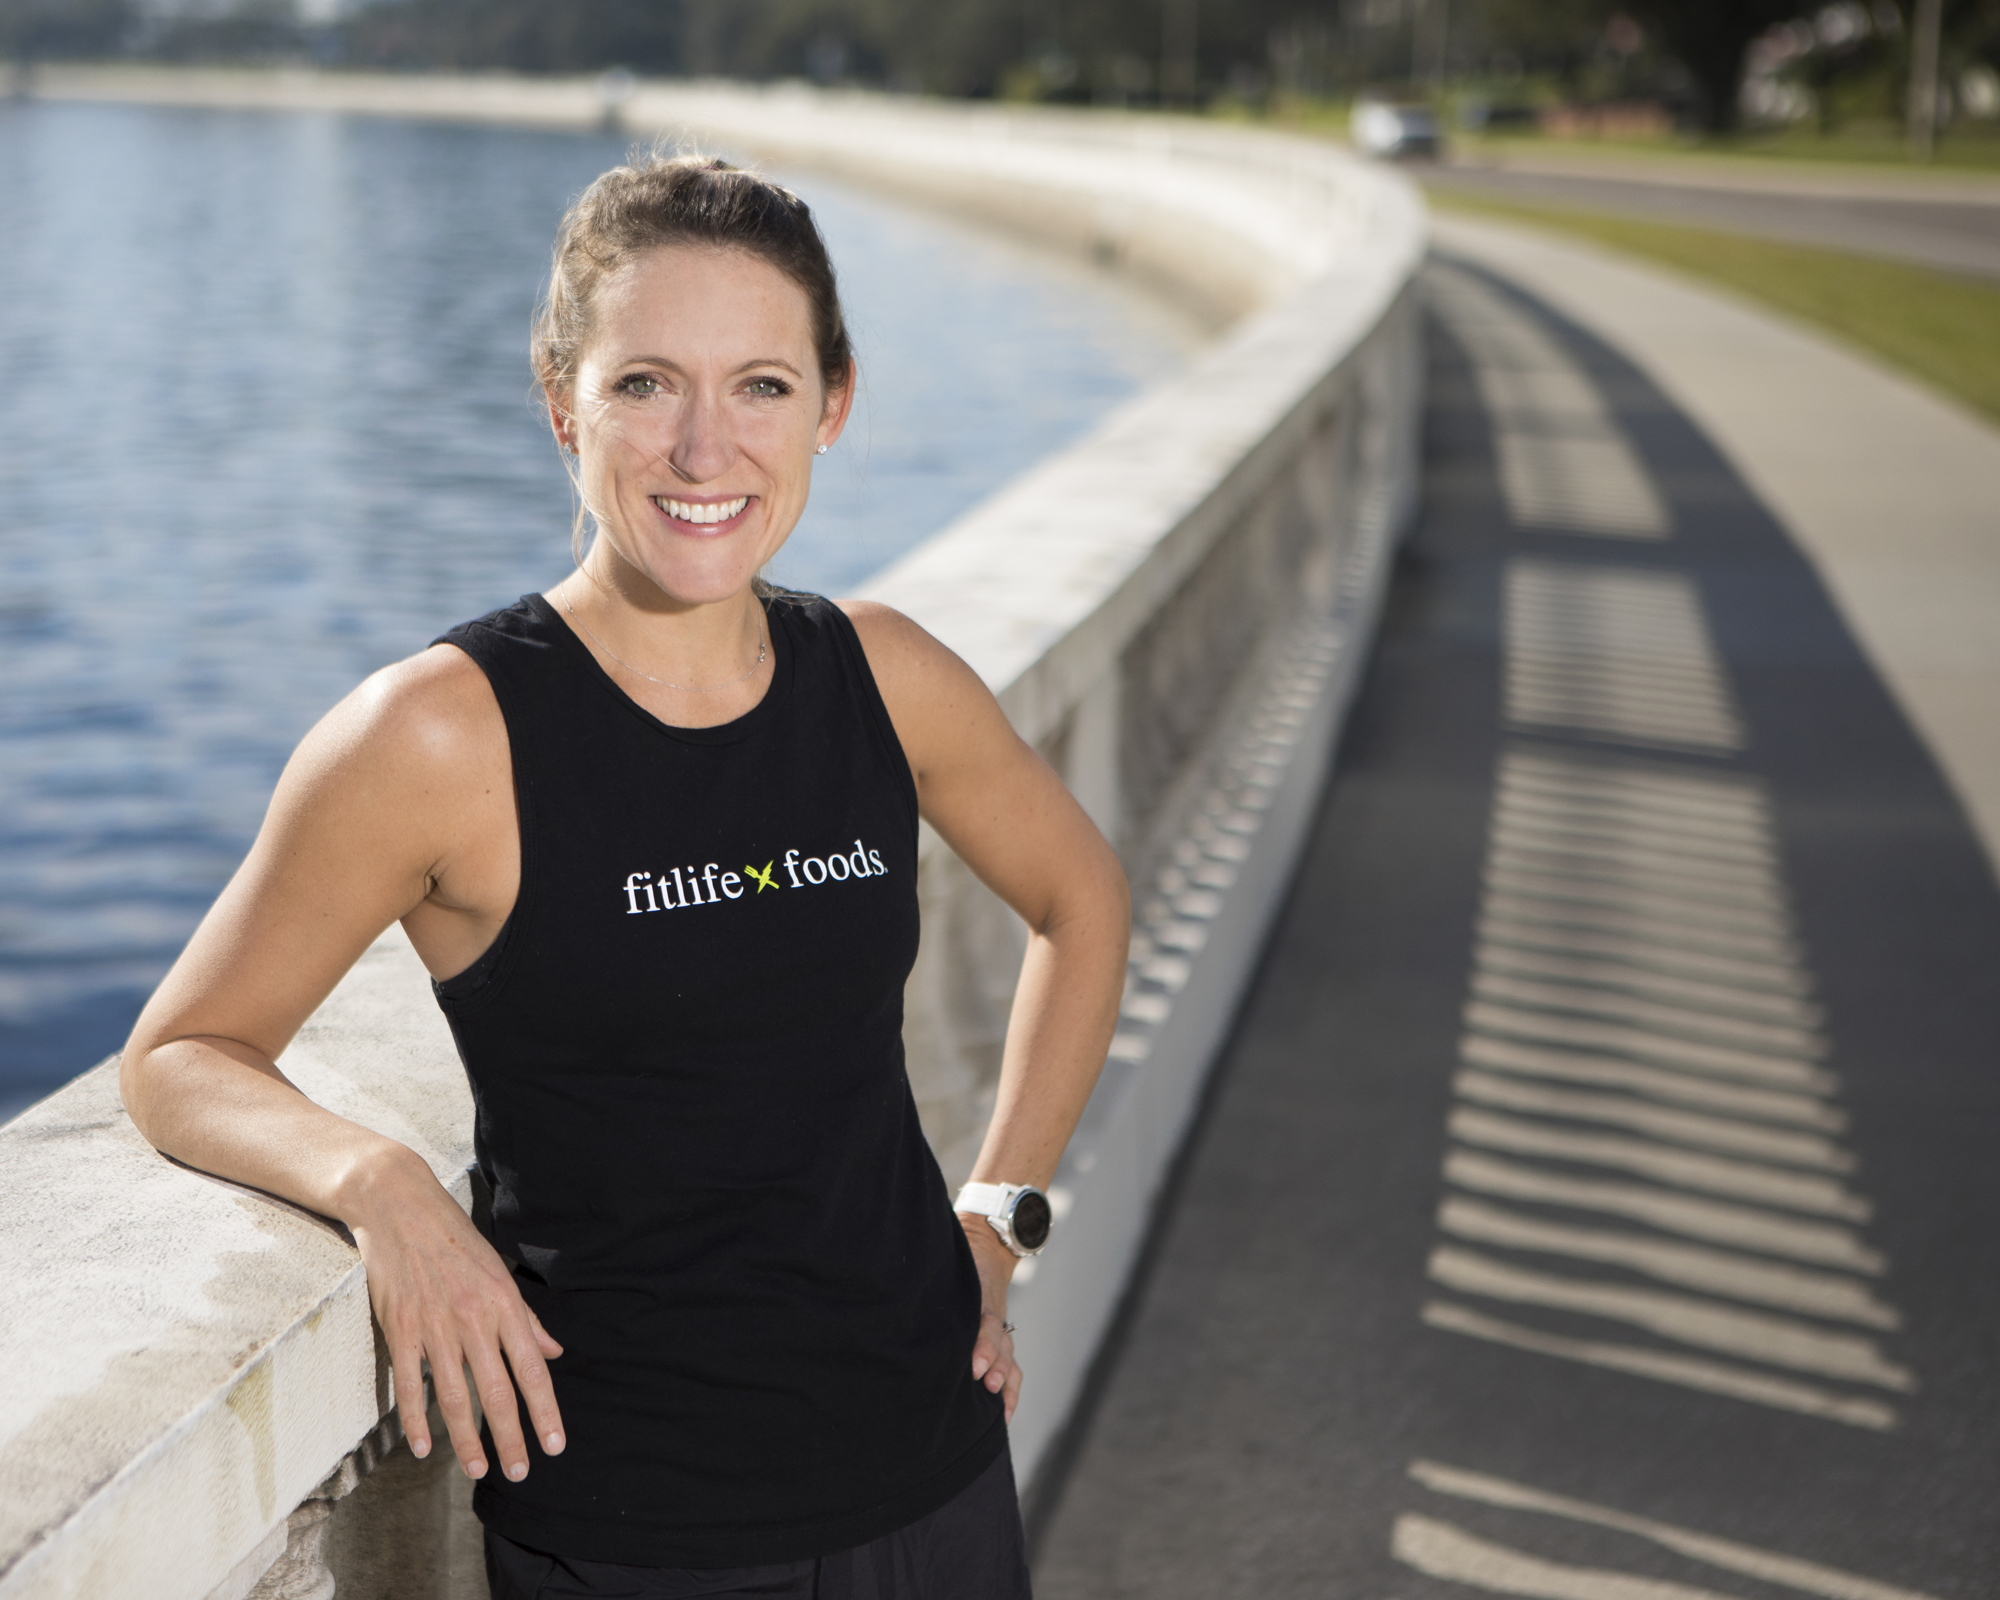 Mark Wemple. Penny Primus, 36, director of product marketing at Fitlife Foods, has been running competitively since 2008.